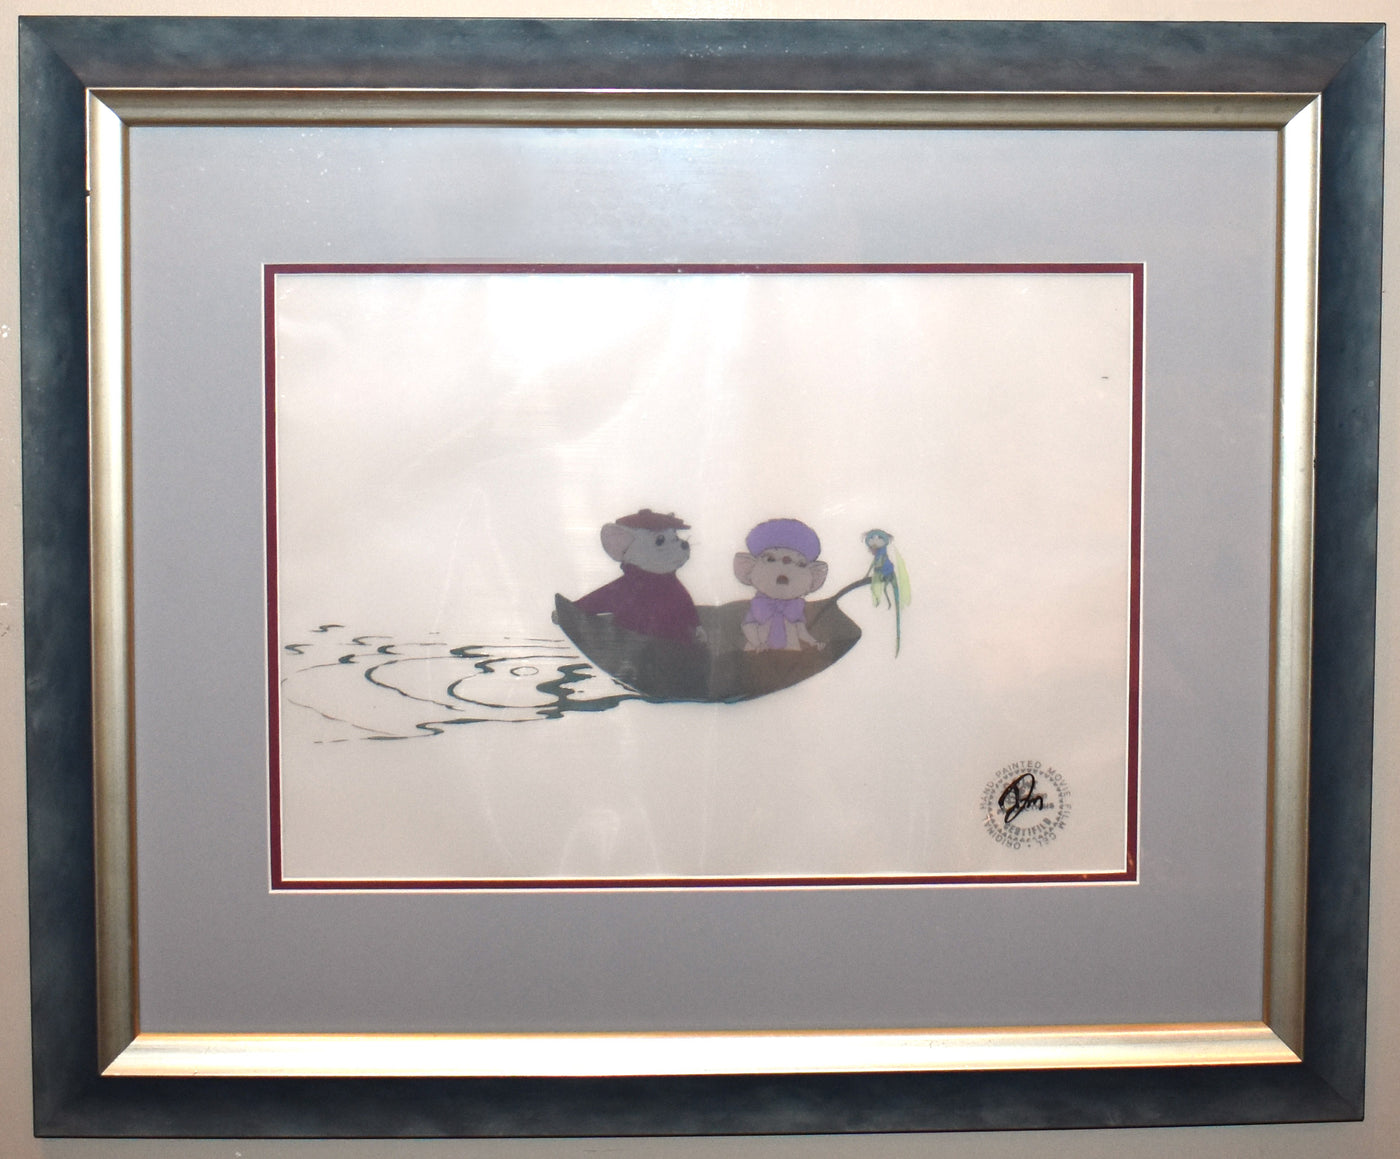 Original Walt Disney Production Cel from The Rescuers featuring Bernard, Miss Bianca, and Evinrude